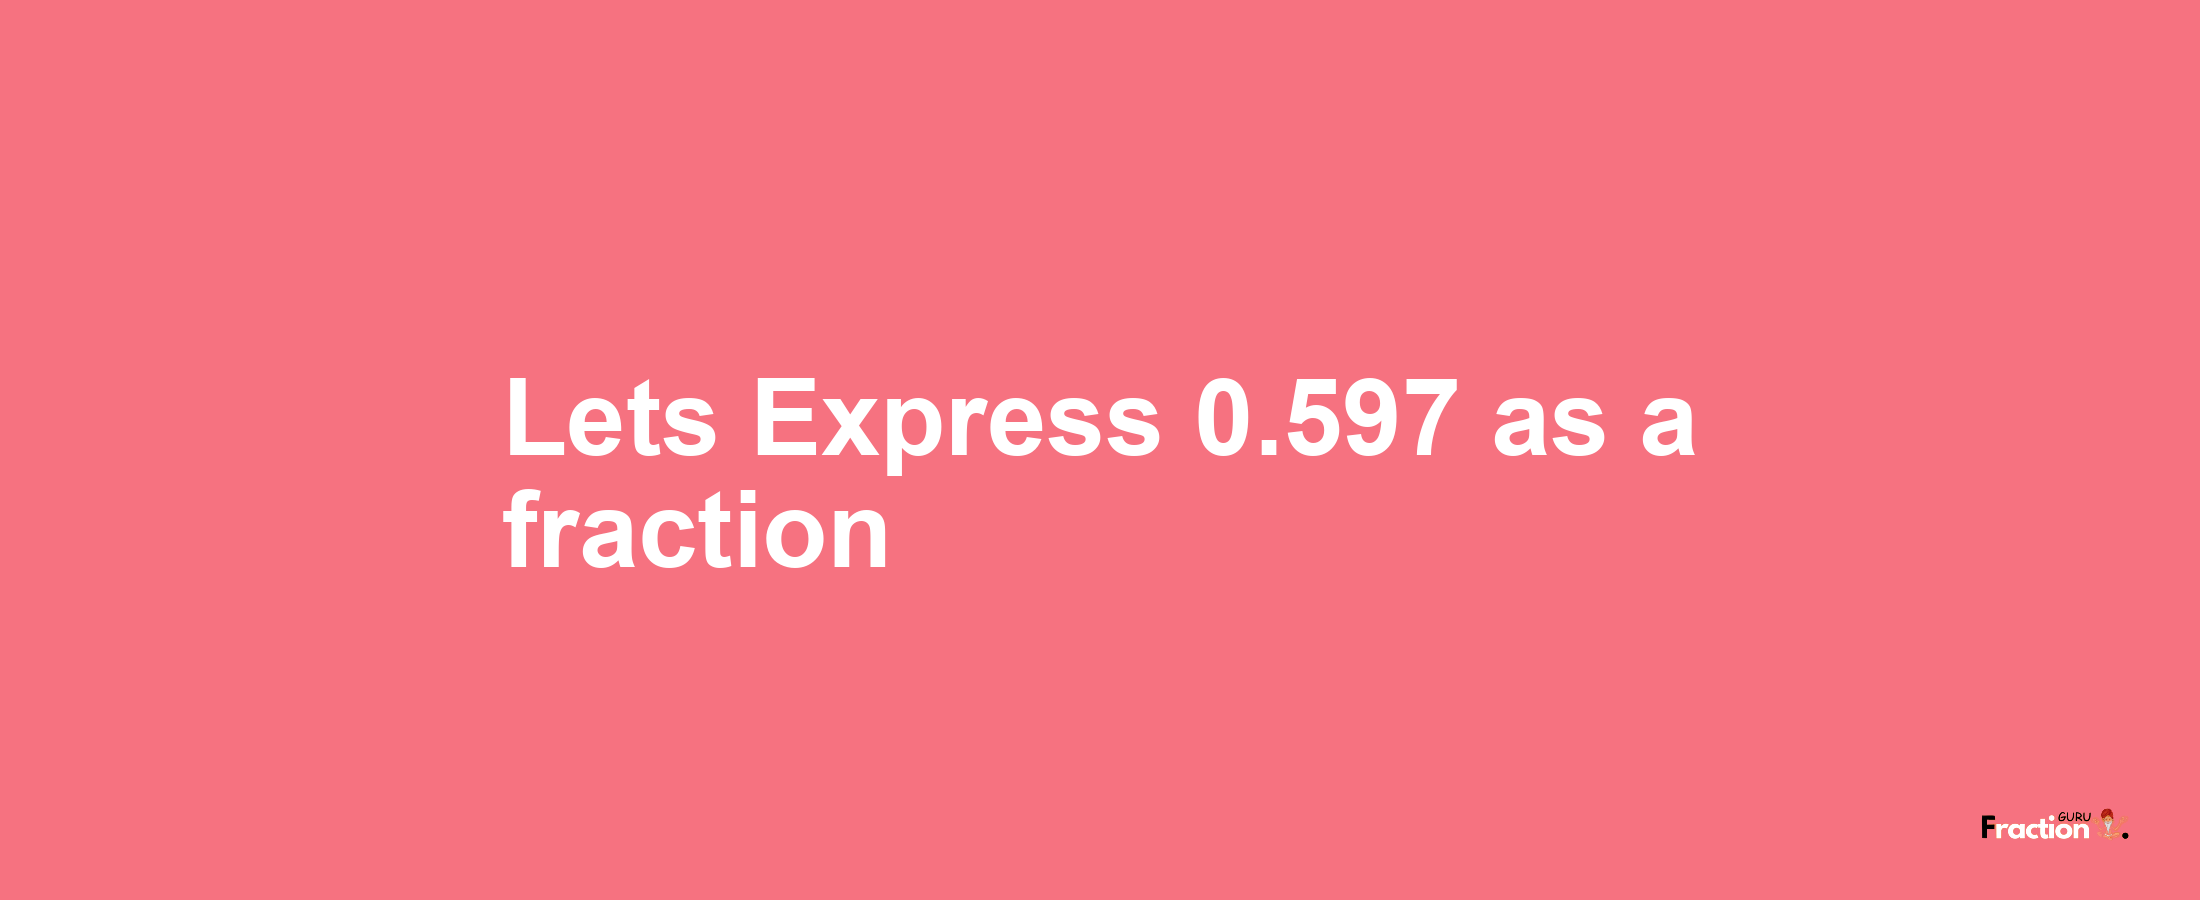 Lets Express 0.597 as afraction